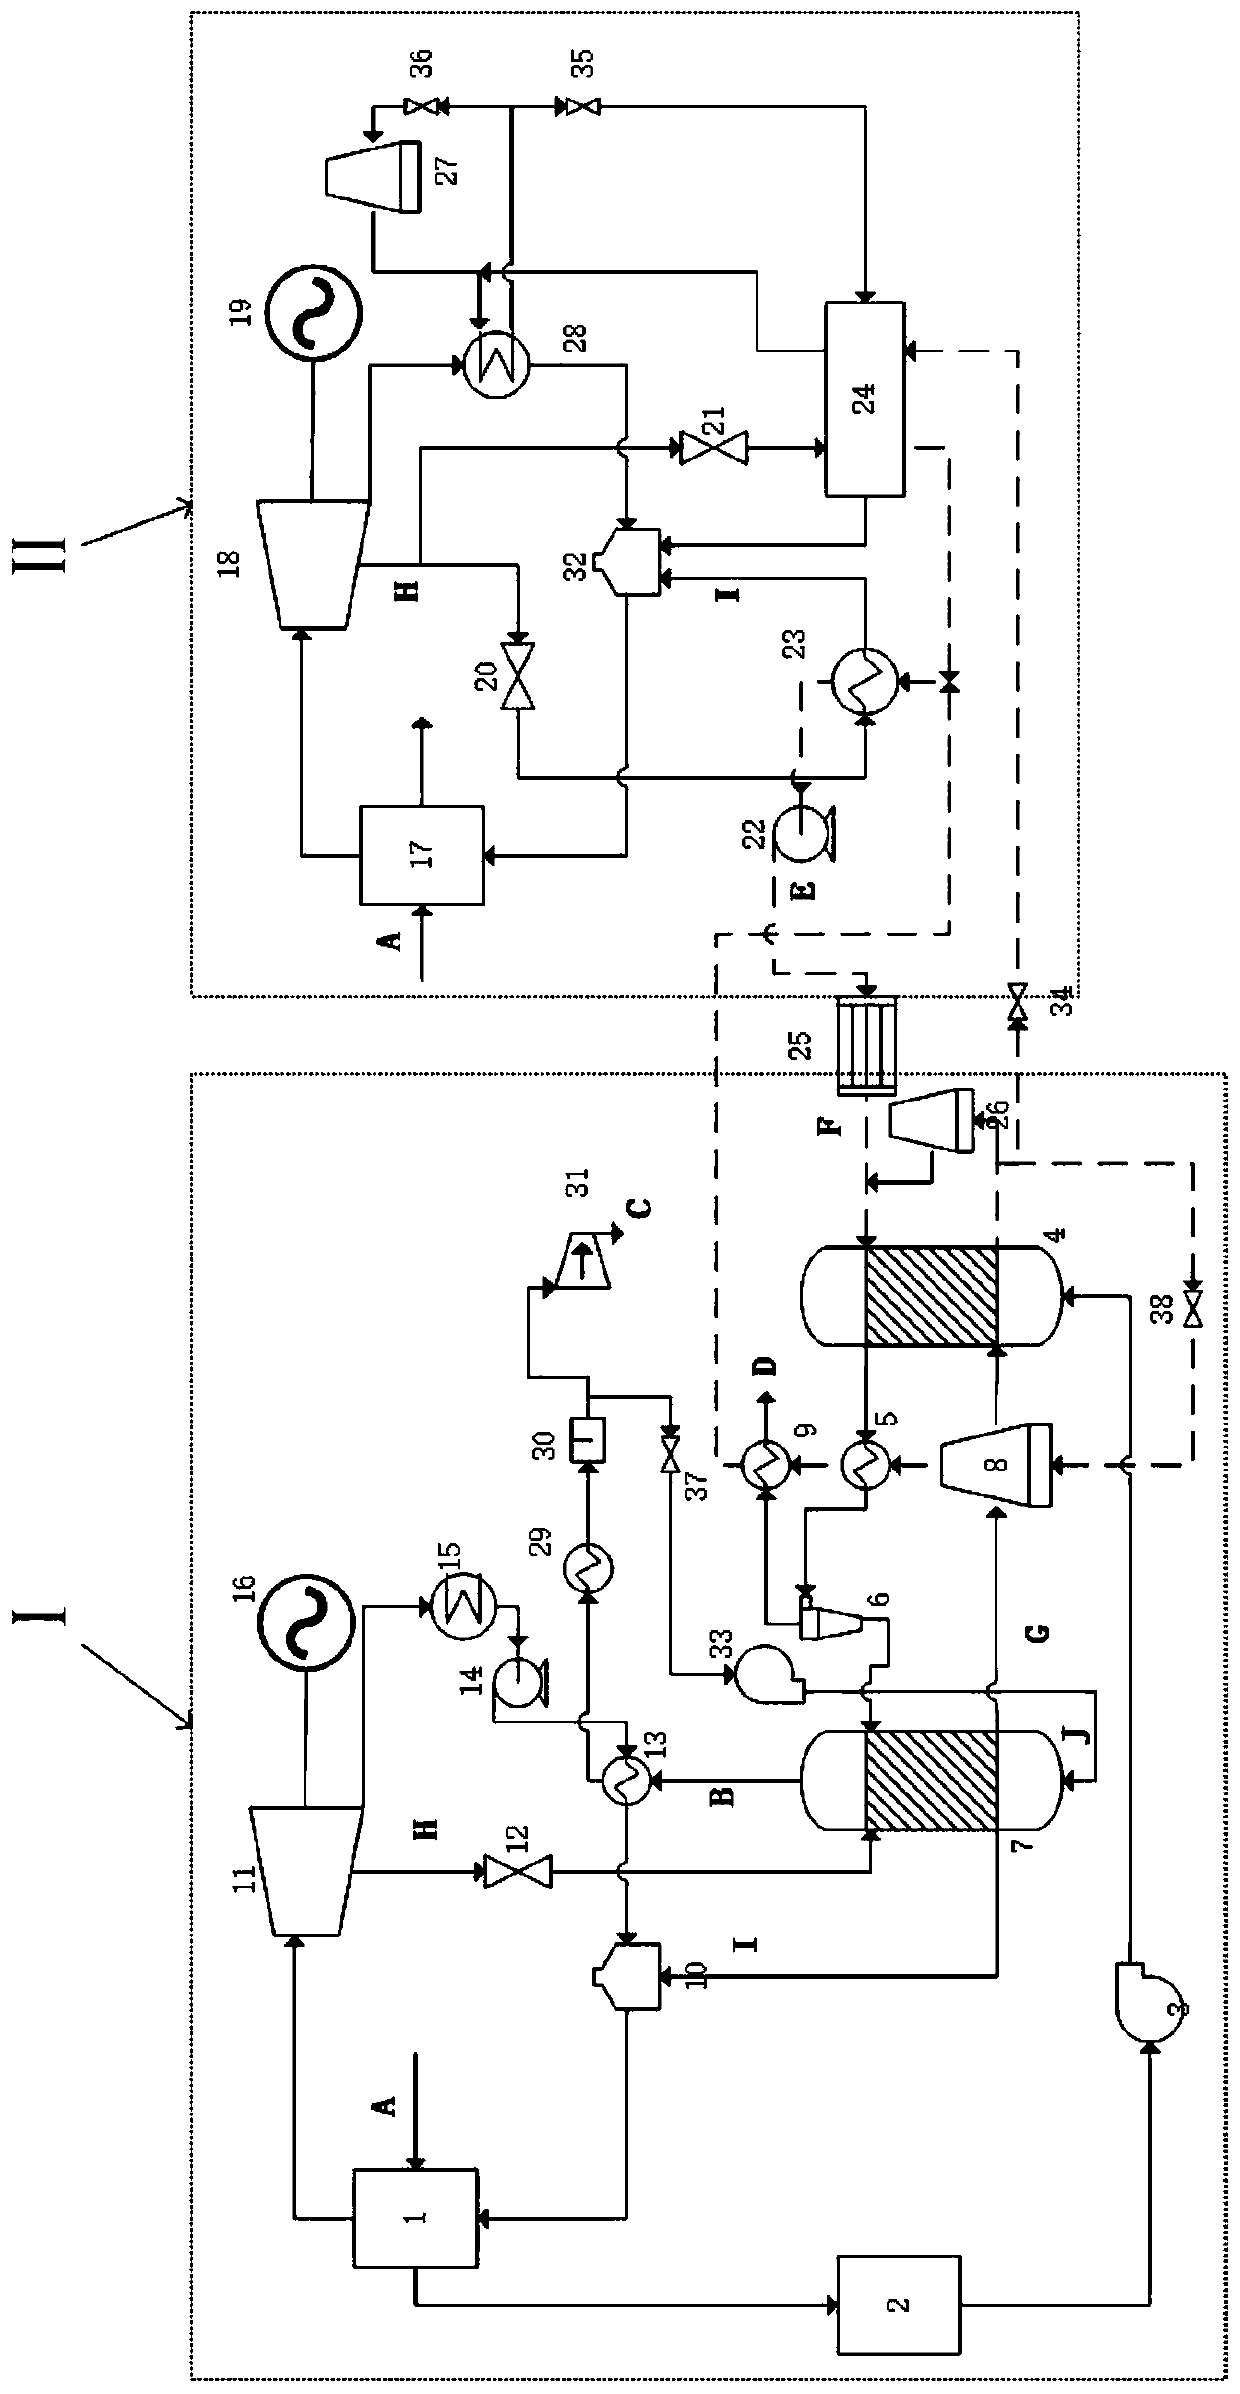 Recovery of thermal power plant dry capture co  <sub>2</sub> Systems where process waste heat is used for heating